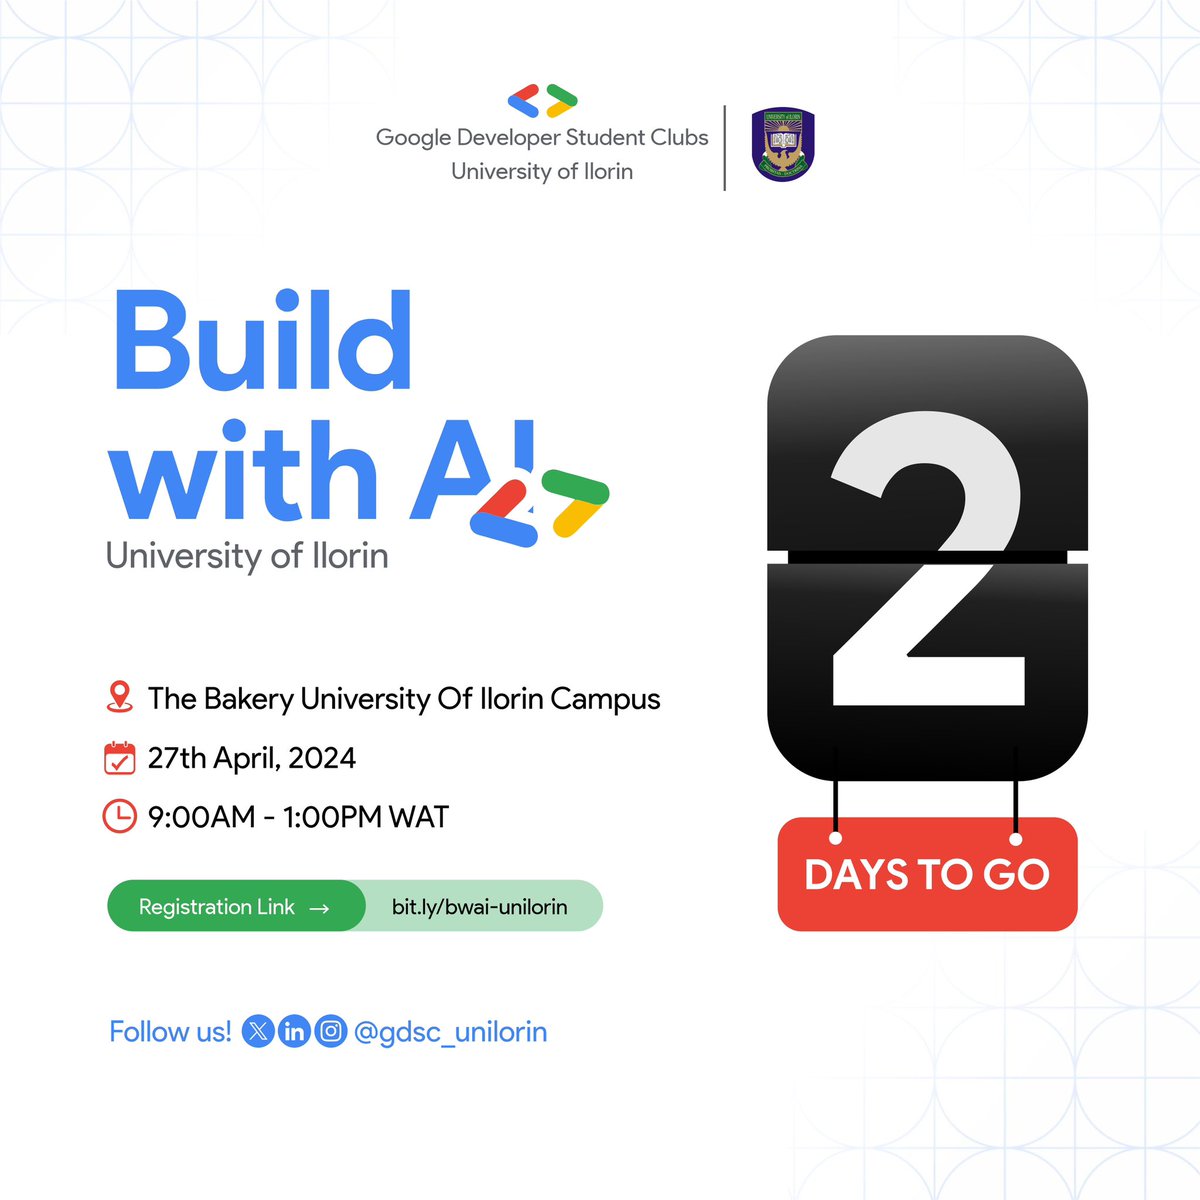 Just 2 days left! 🤭🤭🤭 Ready for an amazing event where we learn, connect, and have fun? Don't miss out on this awesome experience🫵. It's a chance to boost your skills, make new connections and make innovations with AI. See you there! #BuildwithAI #BuildwithAIUnilorin